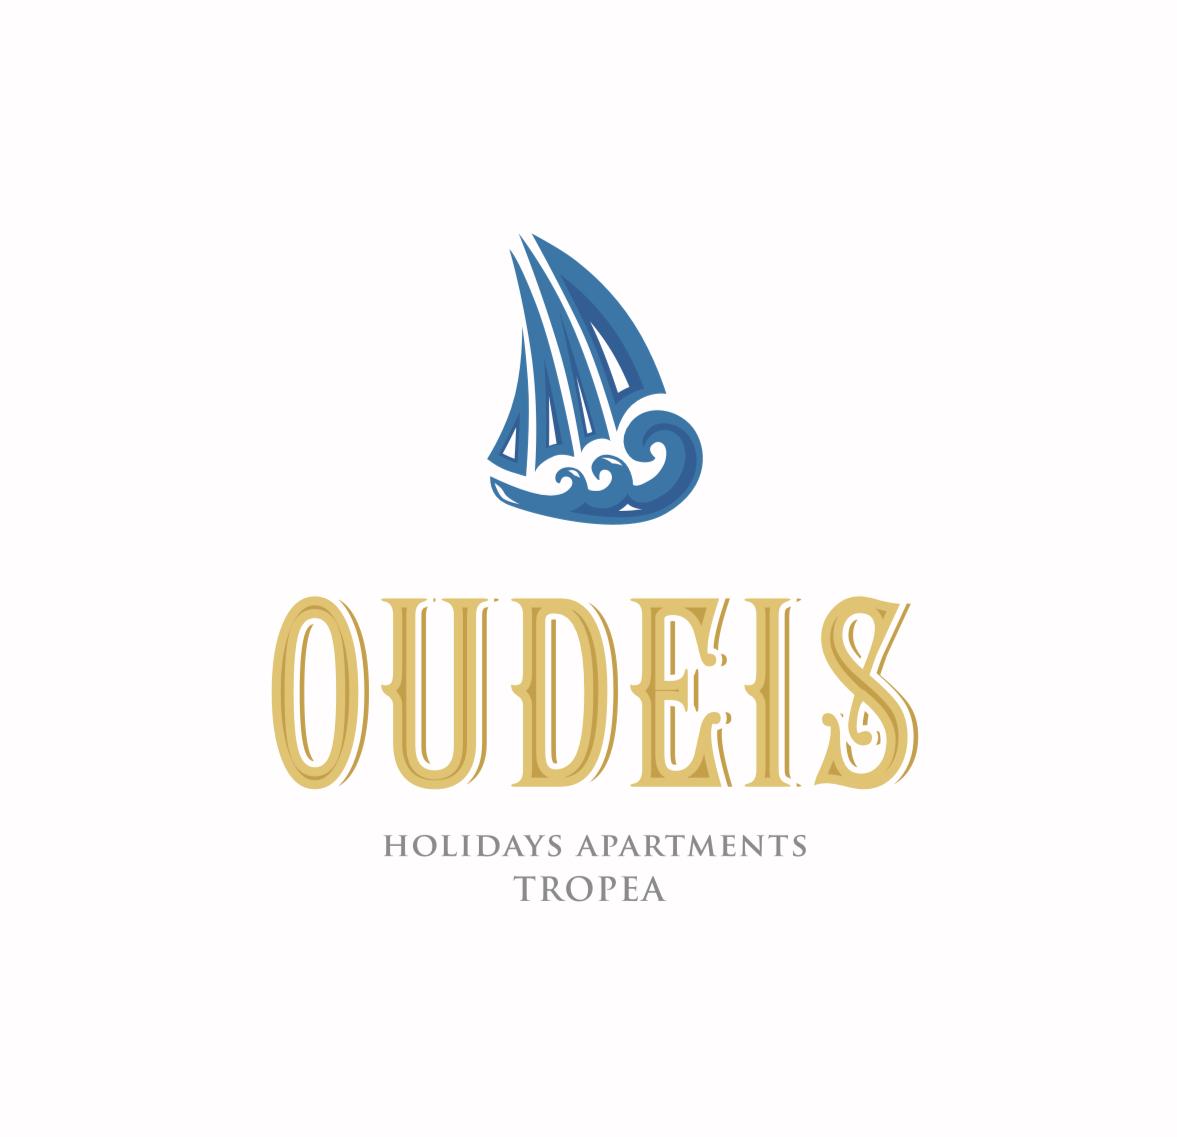 OUDEIS HOLIDAYS APARTMENTS